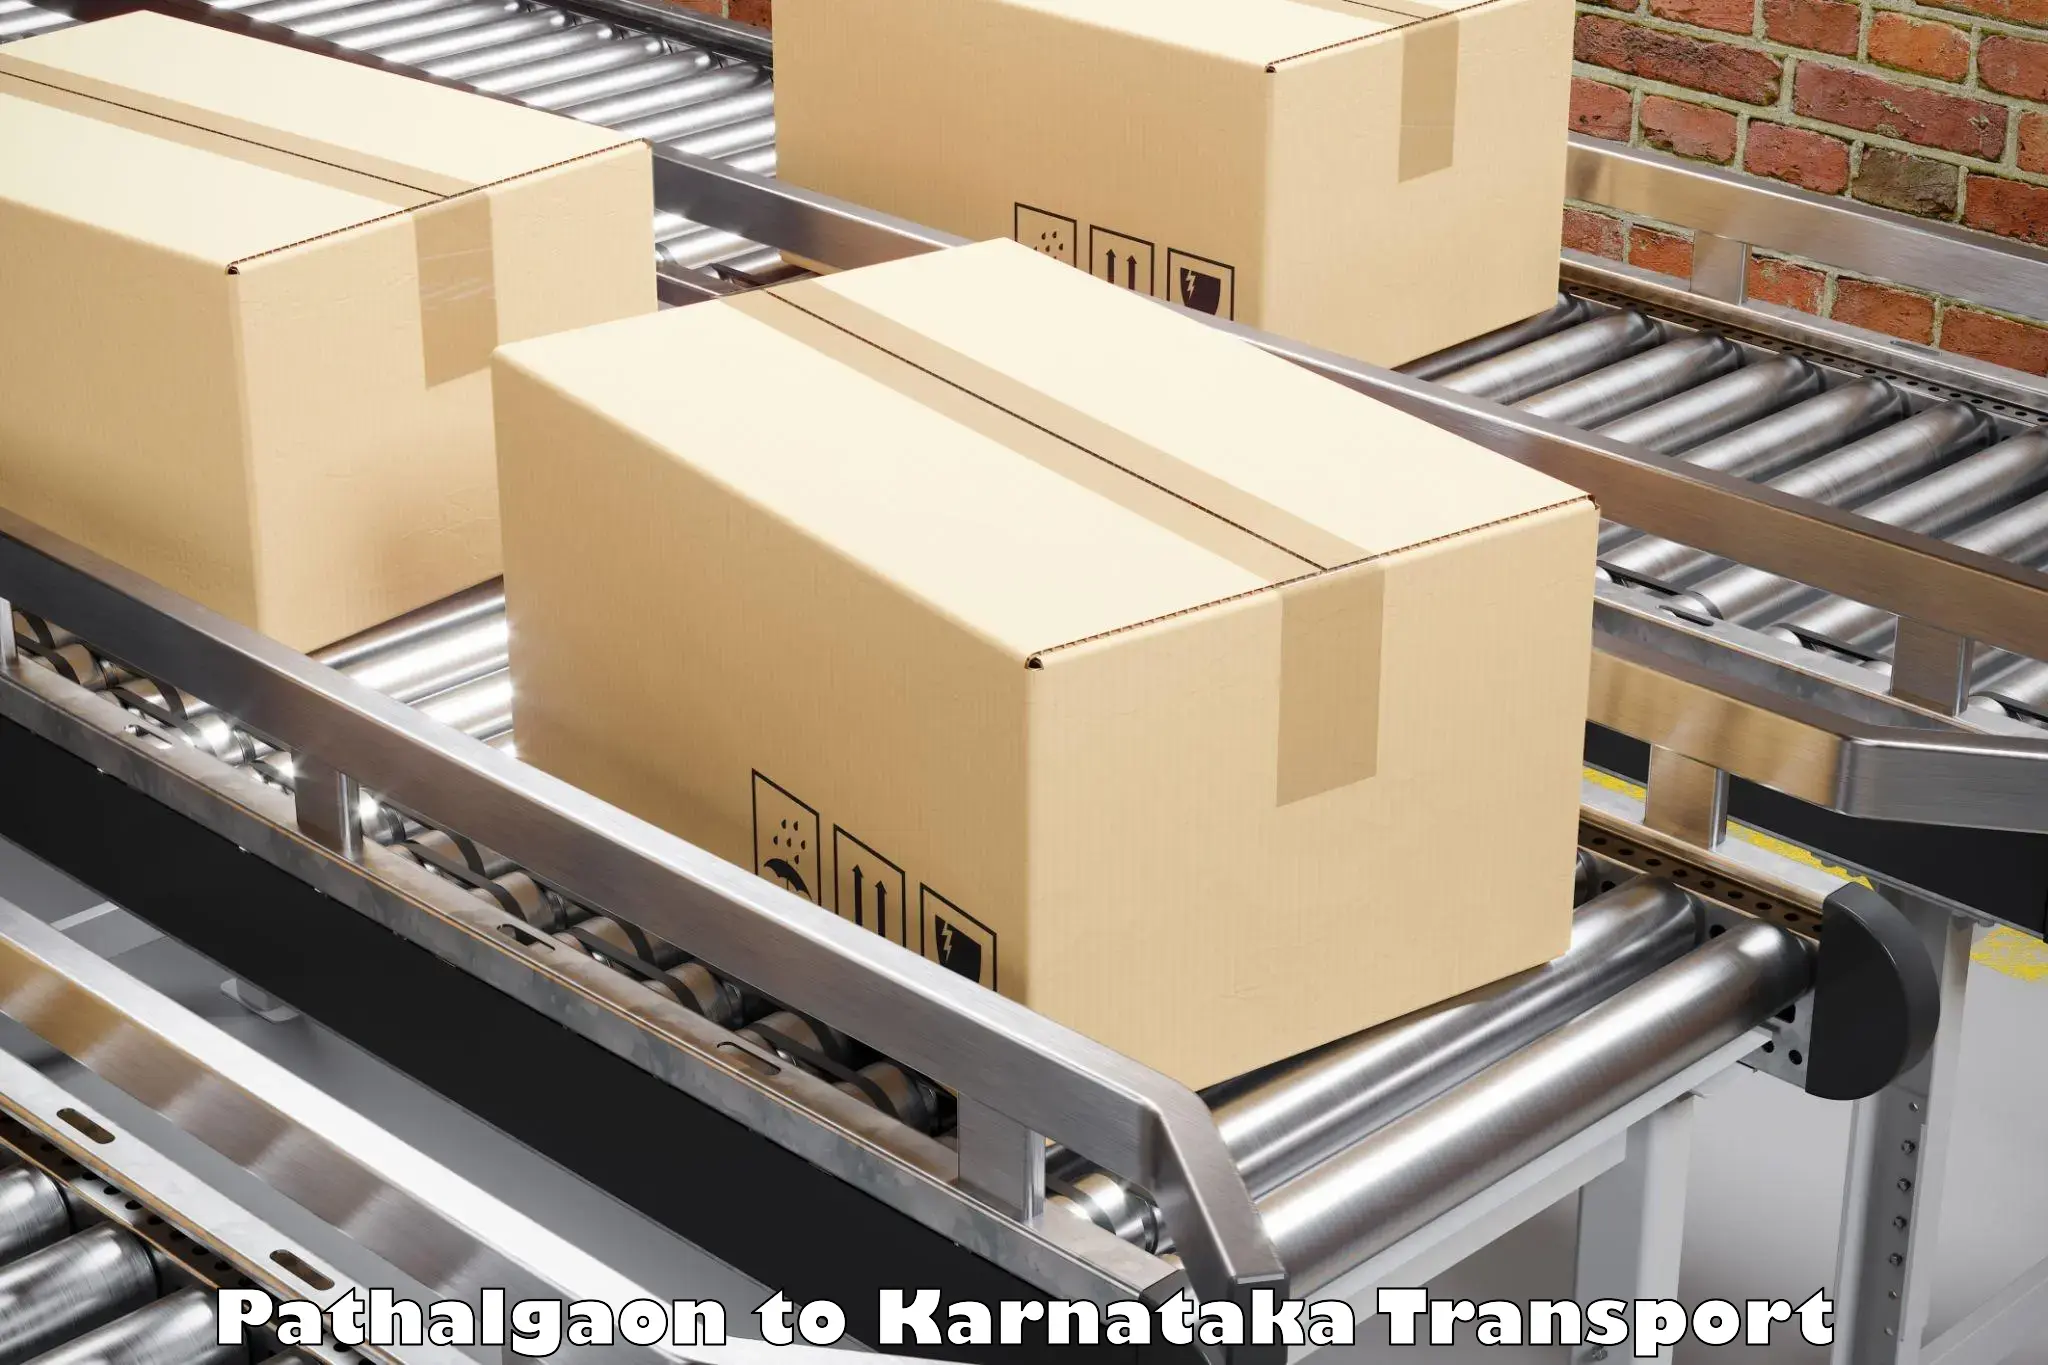 Parcel transport services in Pathalgaon to Tumkur